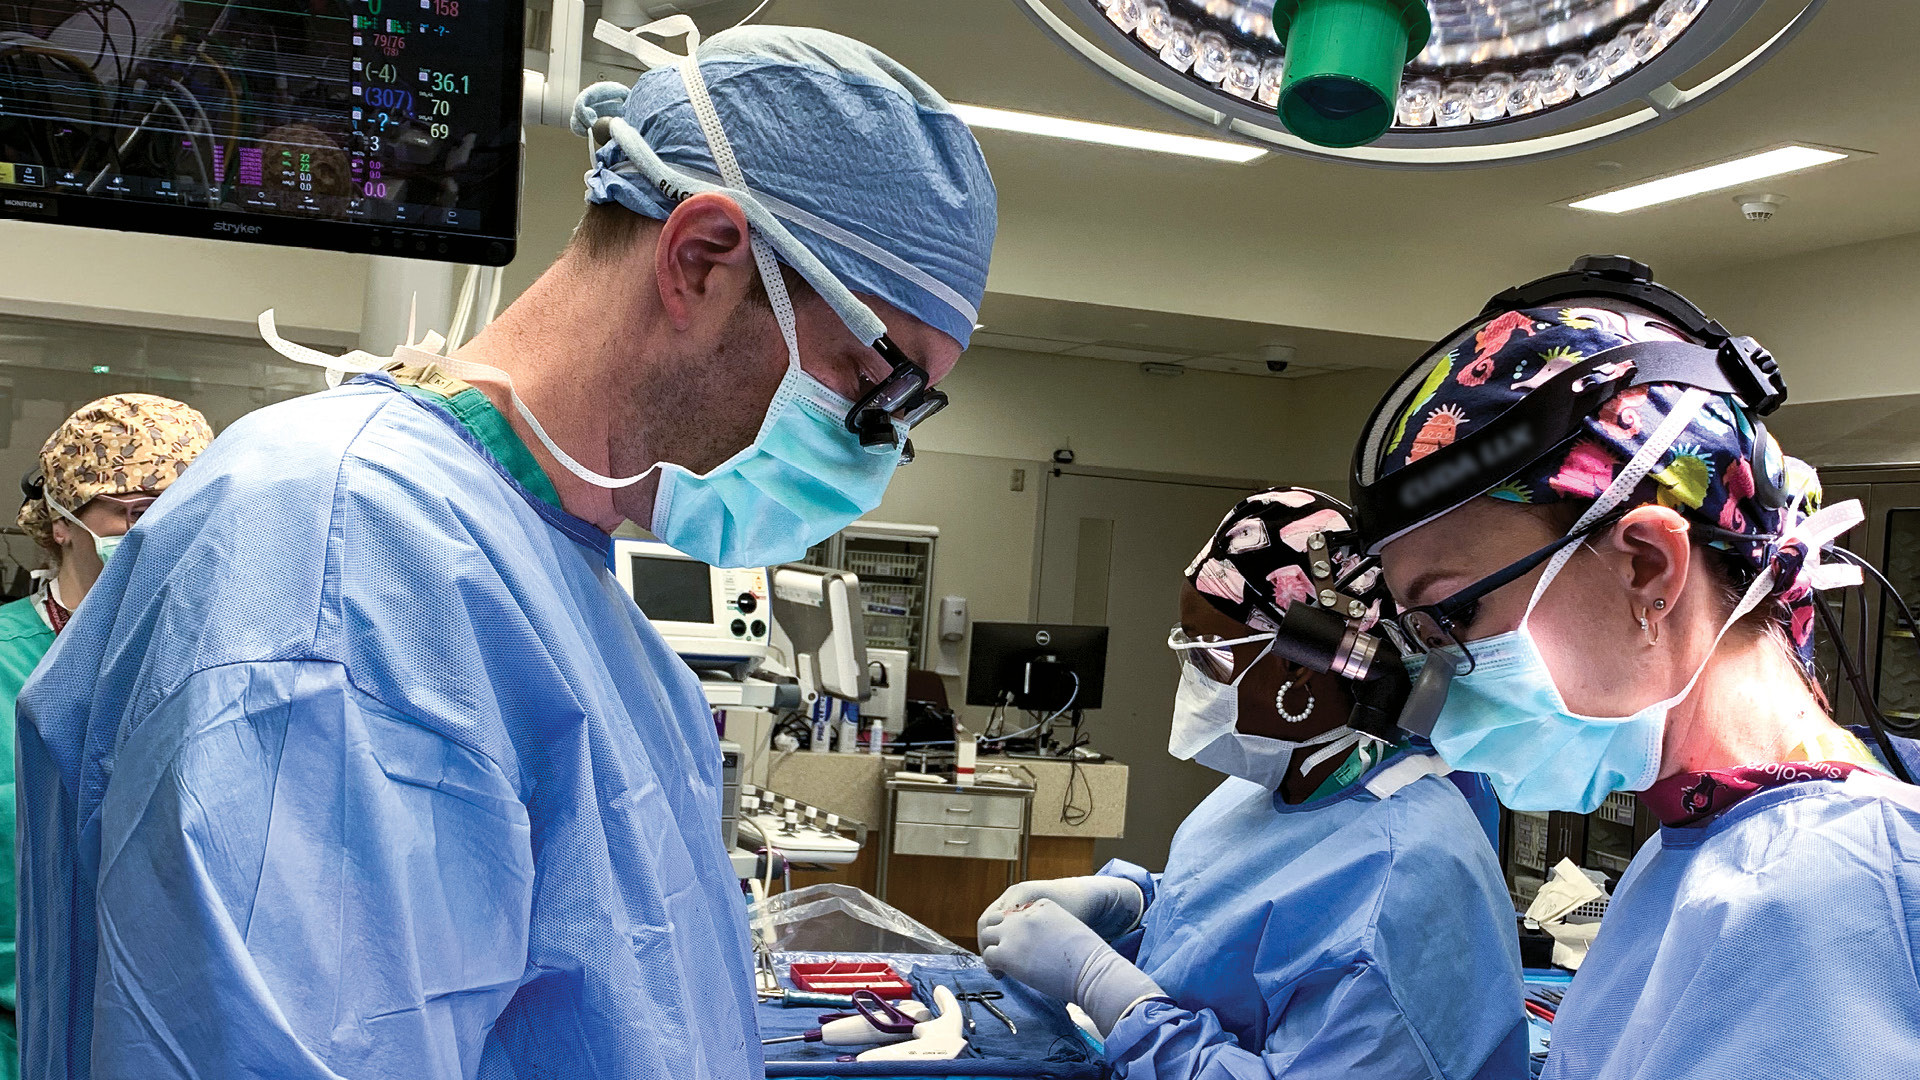 New Technologies, Approaches Help Surgeons Maximize the Use of Transplant Organs